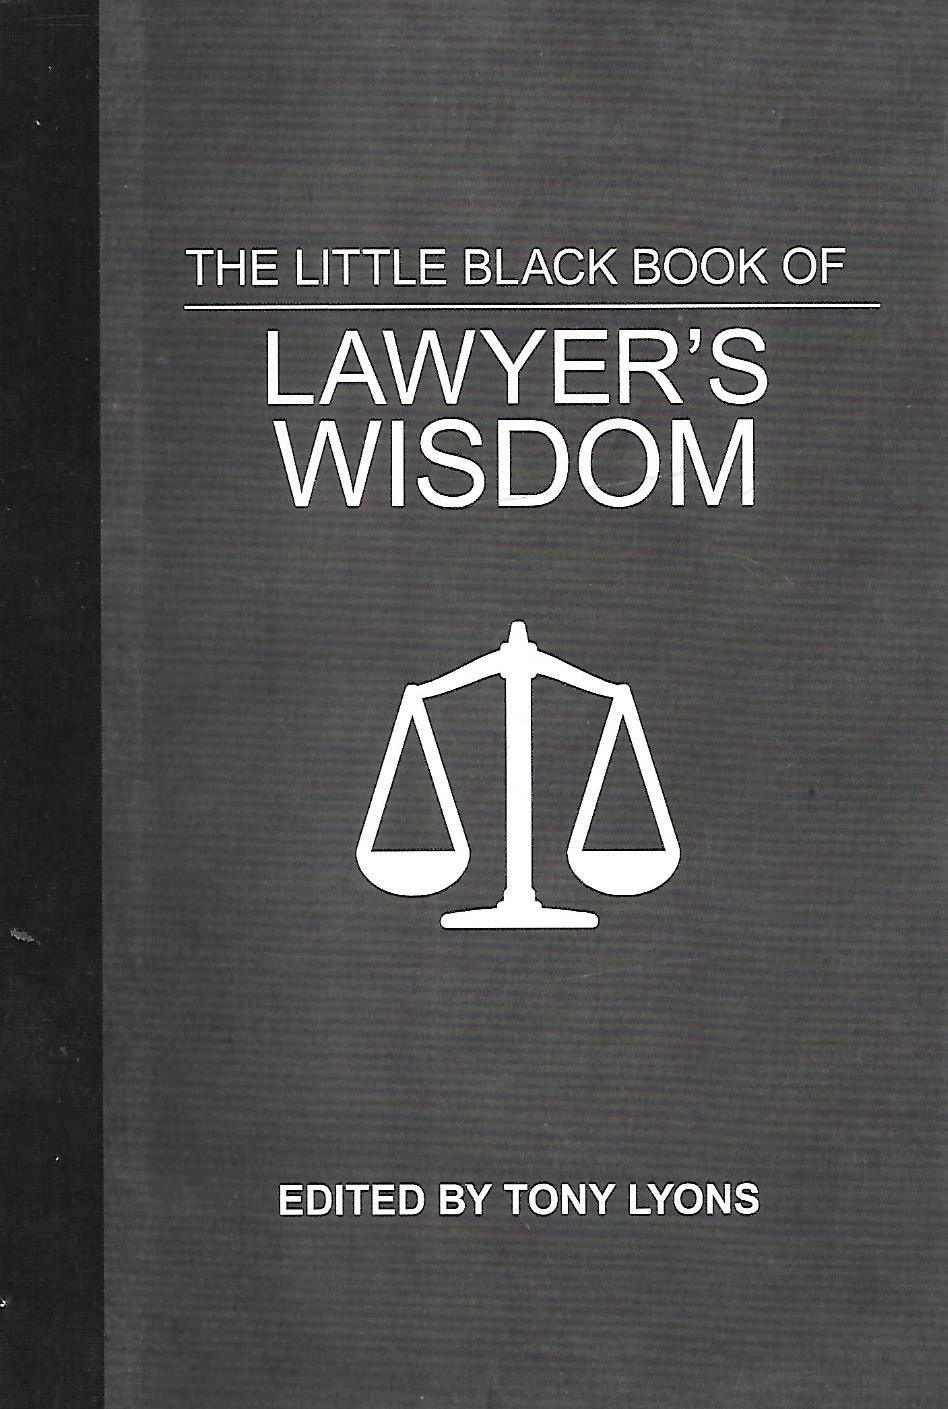 The Little Black Book Of Lawyer's Wisdom